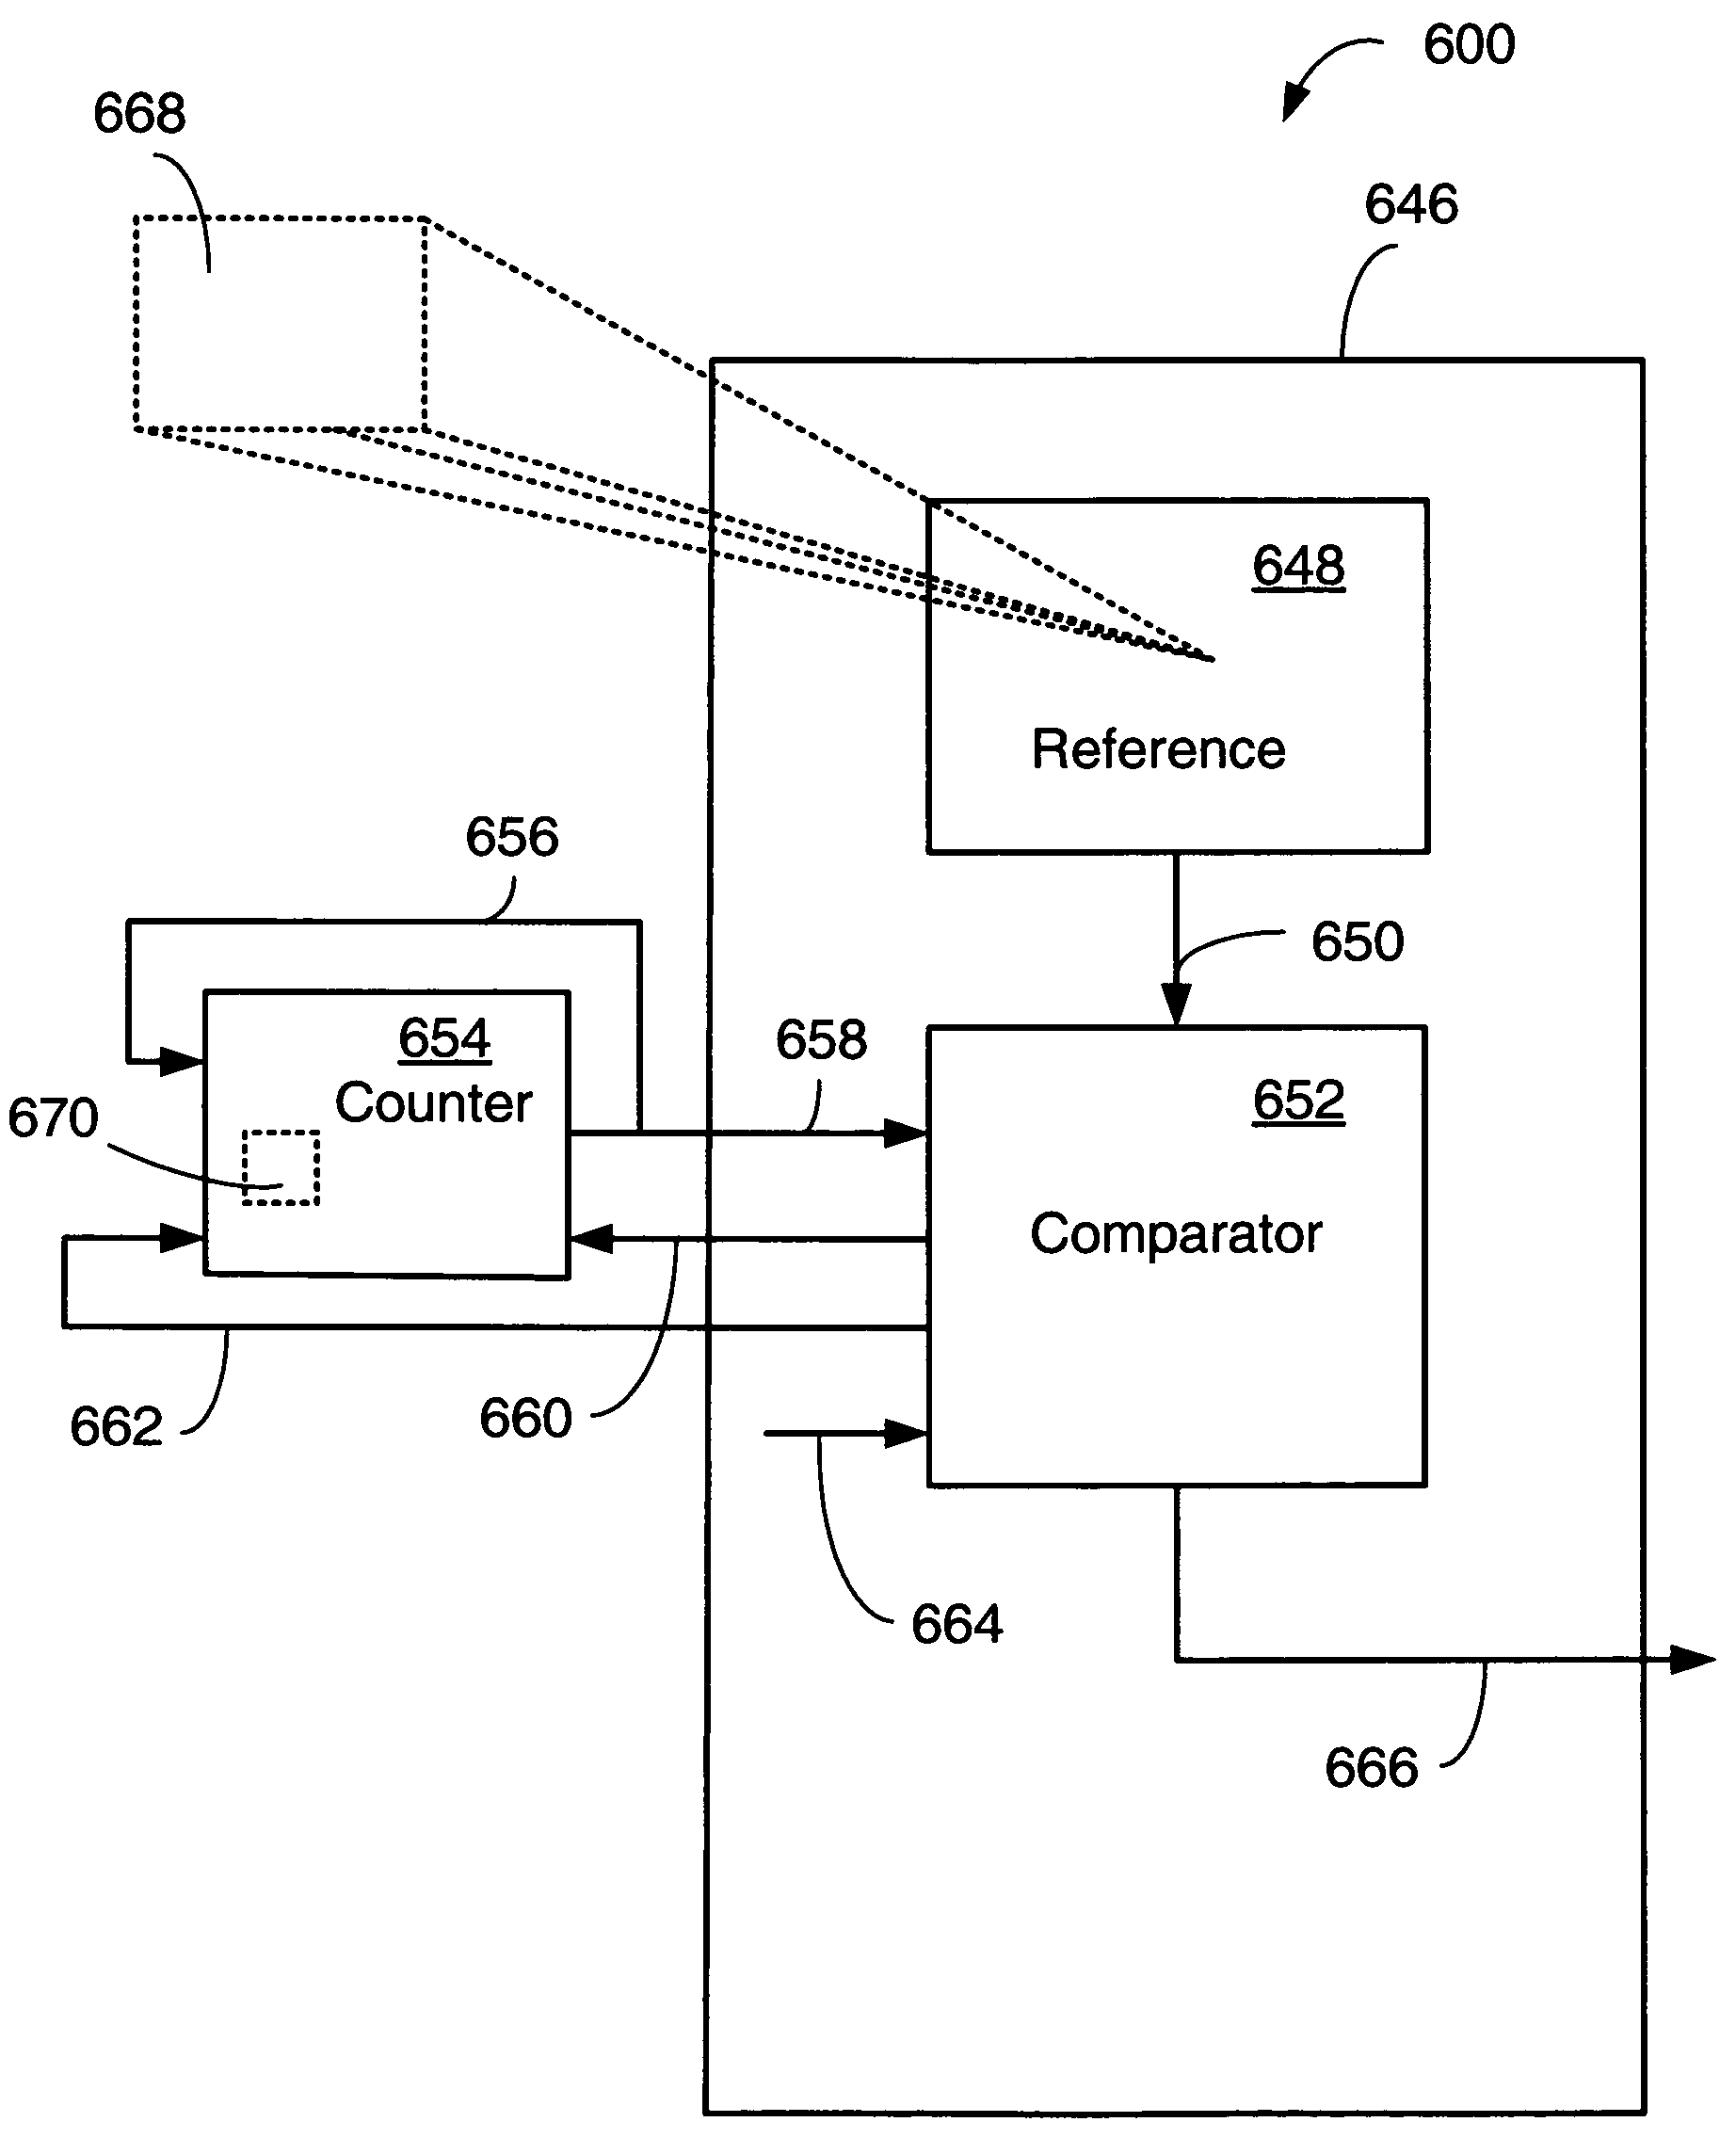 Physically-enforced time-limited cores and method of operation